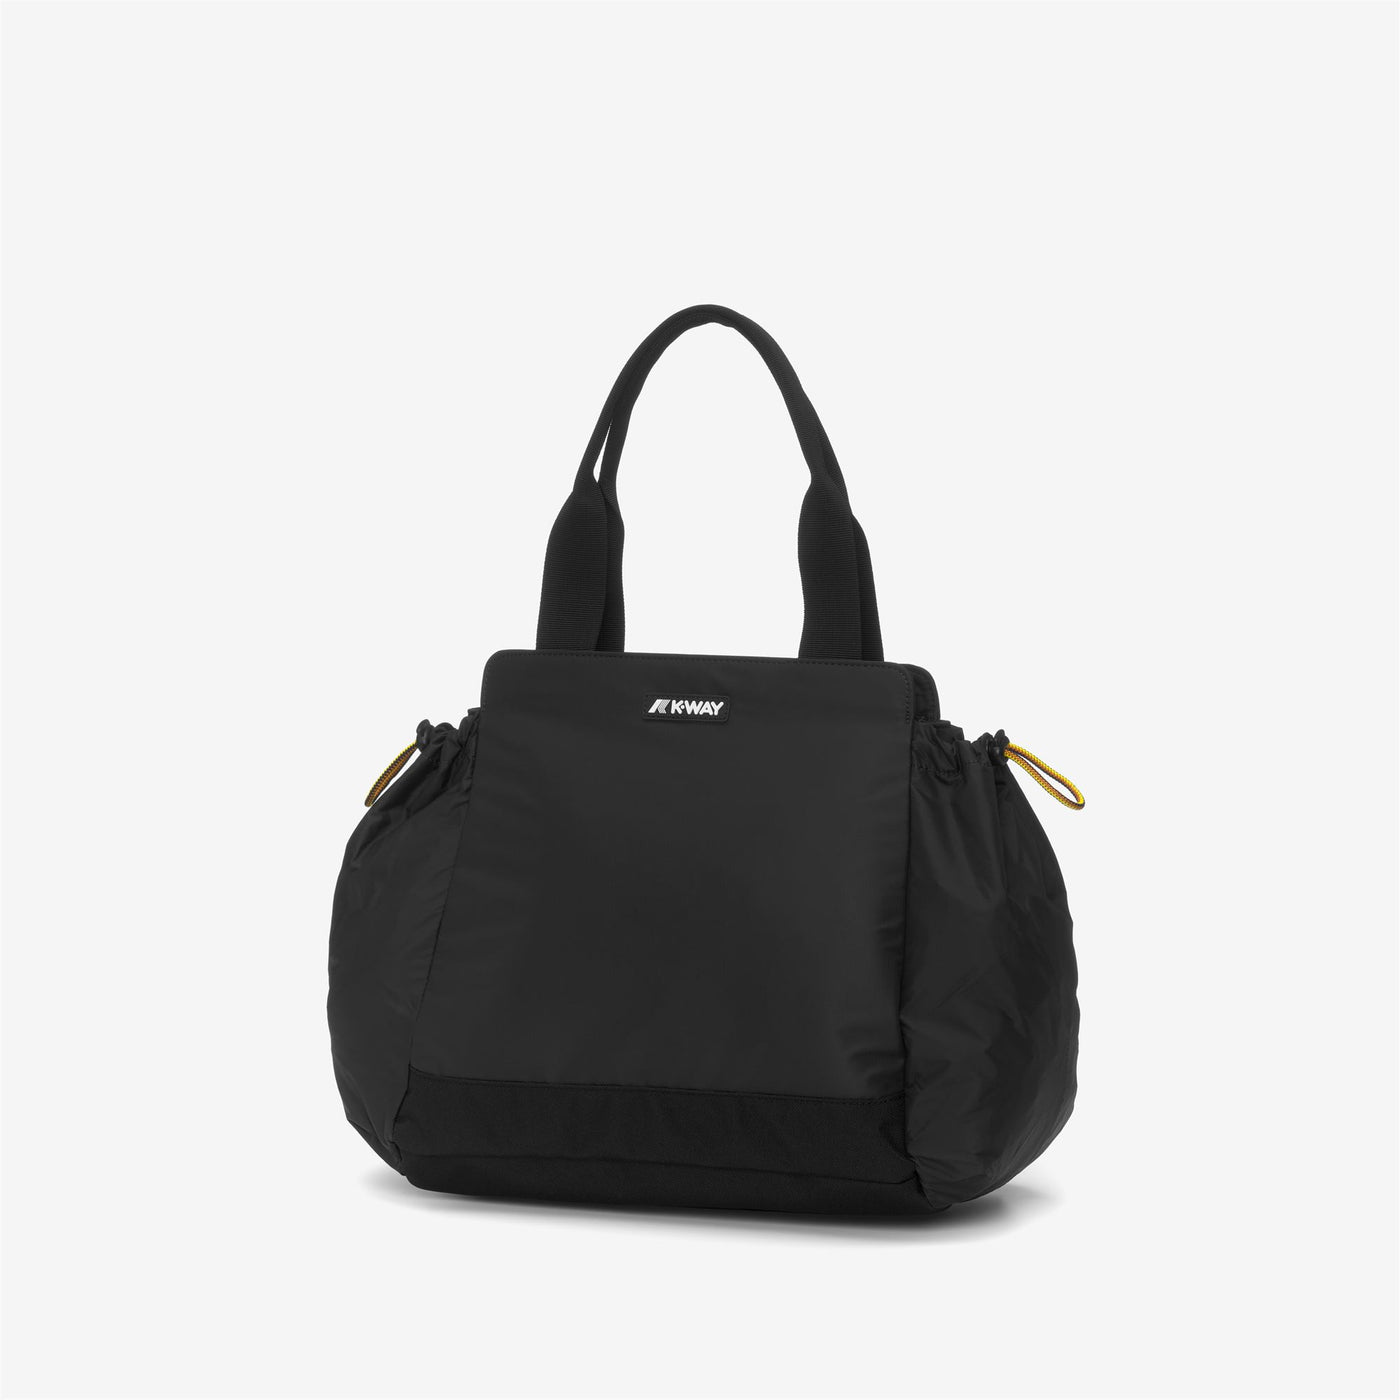 Bags Woman AISY TOTE BAG BLACK PURE Dressed Front (jpg Rgb)	